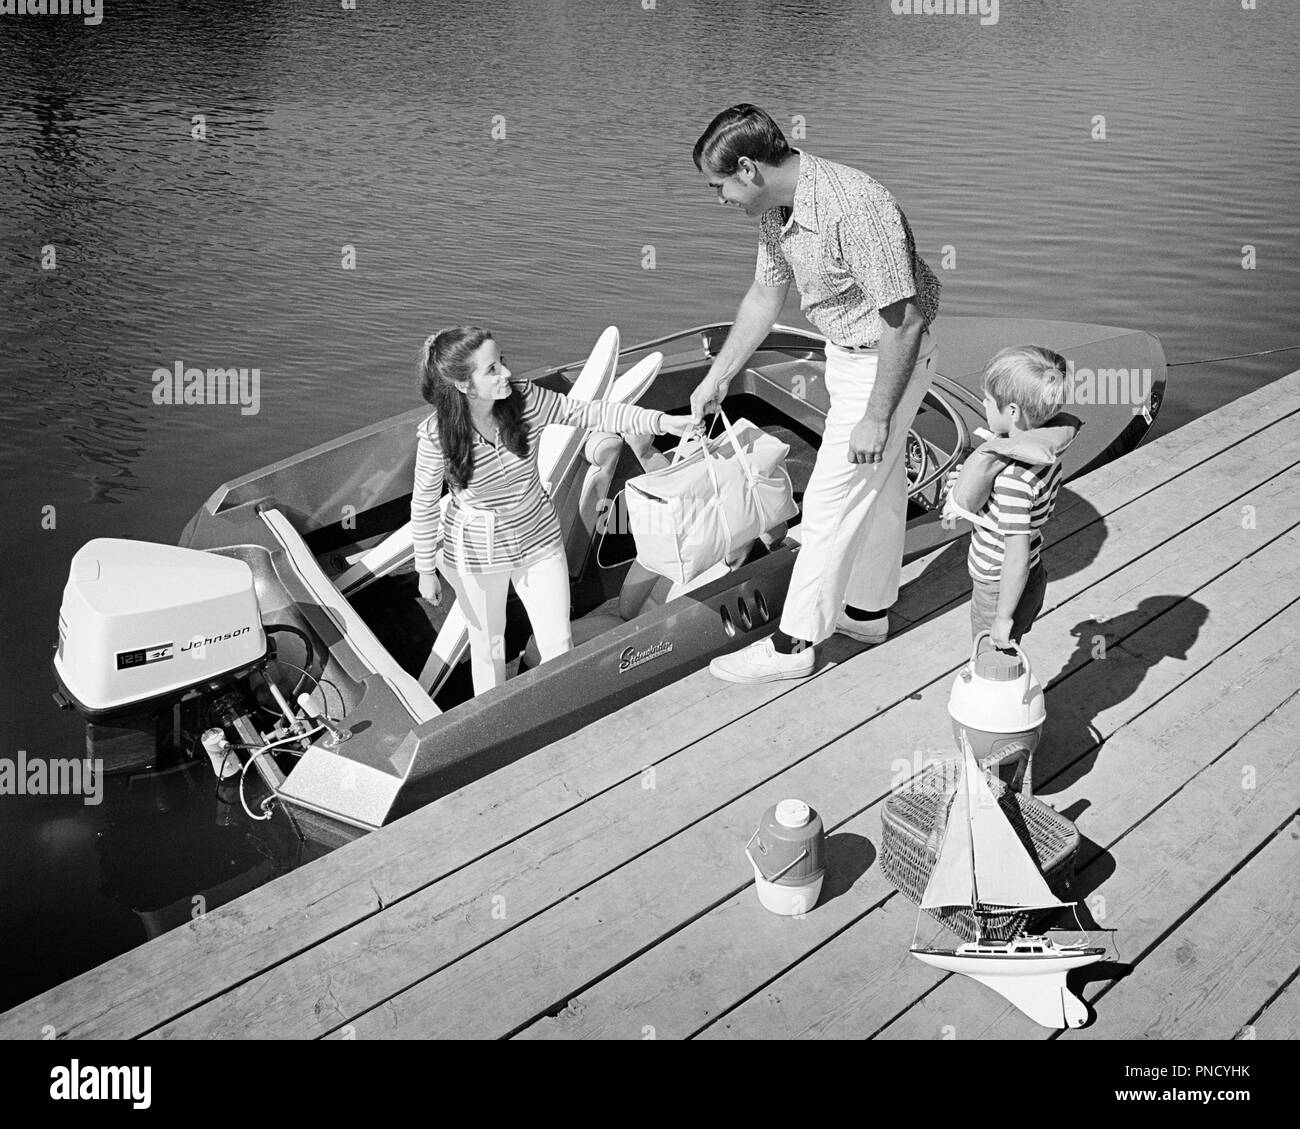 1970s FAMILY OF THREE FATHER MOTHER SON LOADING PICNIC COOLERS TOYS AND WATER SKIS INTO OUTBOARD MOTOR BOAT DOCKSIDE - b24696 HAR001 HARS RIVER NOSTALGIA OLD FASHION 1 JUVENILE BALANCE SAFETY TEAMWORK VACATION SONS FAMILIES JOY LIFESTYLE FEMALES MARRIED RURAL SPOUSE HUSBANDS HOME LIFE COPY SPACE FULL-LENGTH LADIES PERSONS SCENIC MALES RISK CONFIDENCE TRANSPORTATION FATHERS B&W LOADING TIME OFF HAPPINESS HIGH ANGLE ADVENTURE LEISURE AND GETAWAY DADS EXCITEMENT EXTERIOR KNOWLEDGE RECREATION MOTOR BOAT INTO OF HOLIDAYS CONNECTION ESCAPE STYLISH CARRIERS COOLERS DOCKSIDE COOPERATION JUVENILES Stock Photo